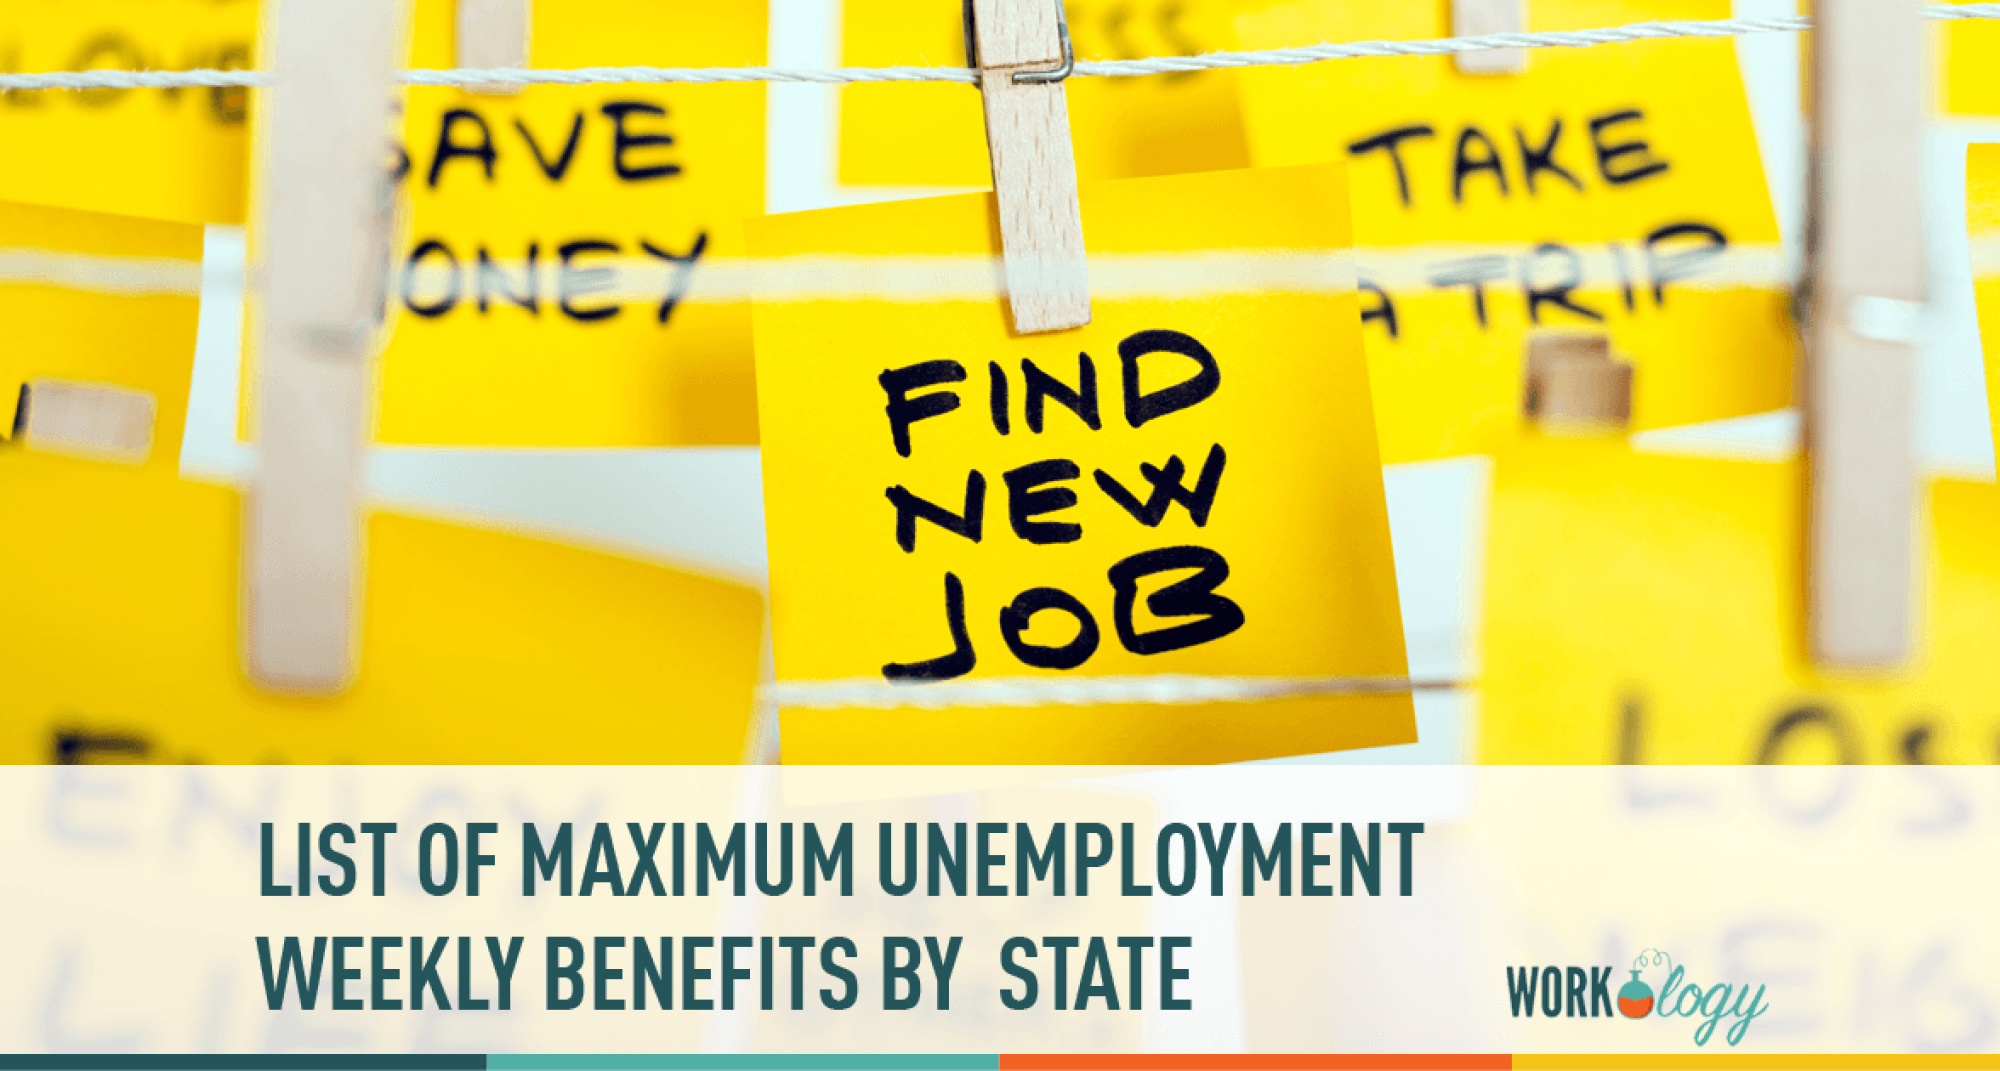 List of Maximum Unemployment Weekly Benefits By State